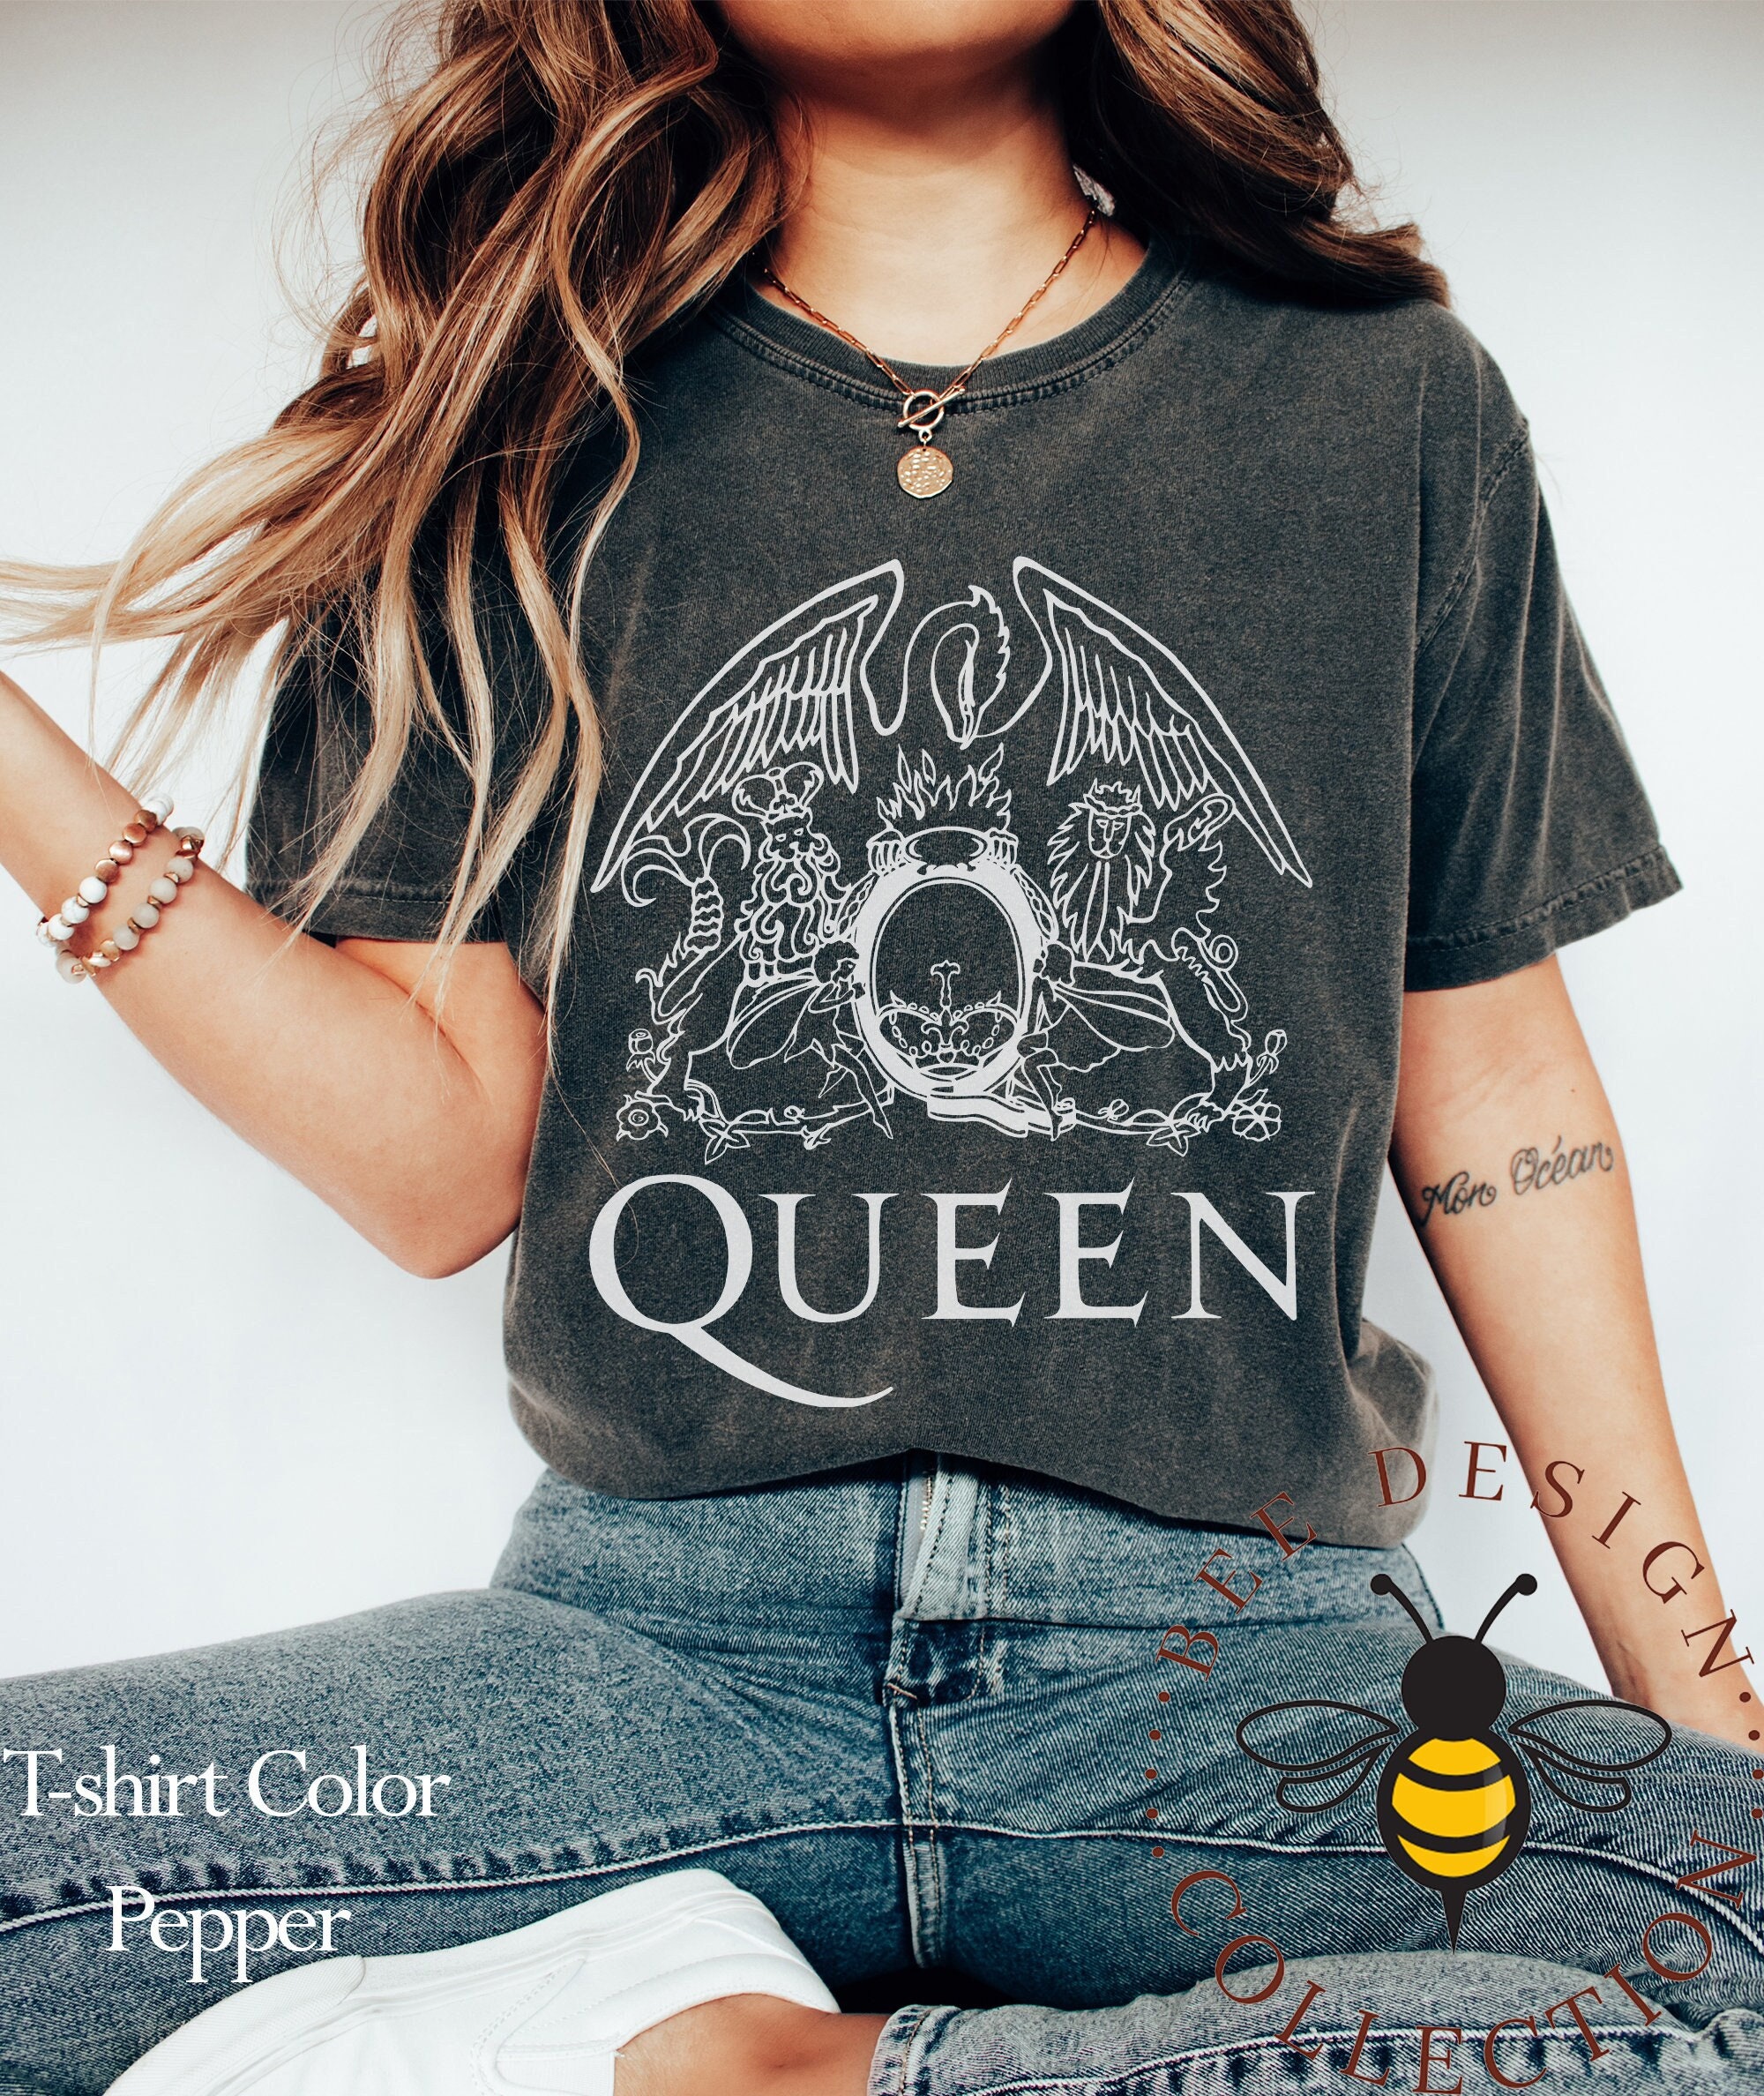 Queen Band Shirts - Etsy